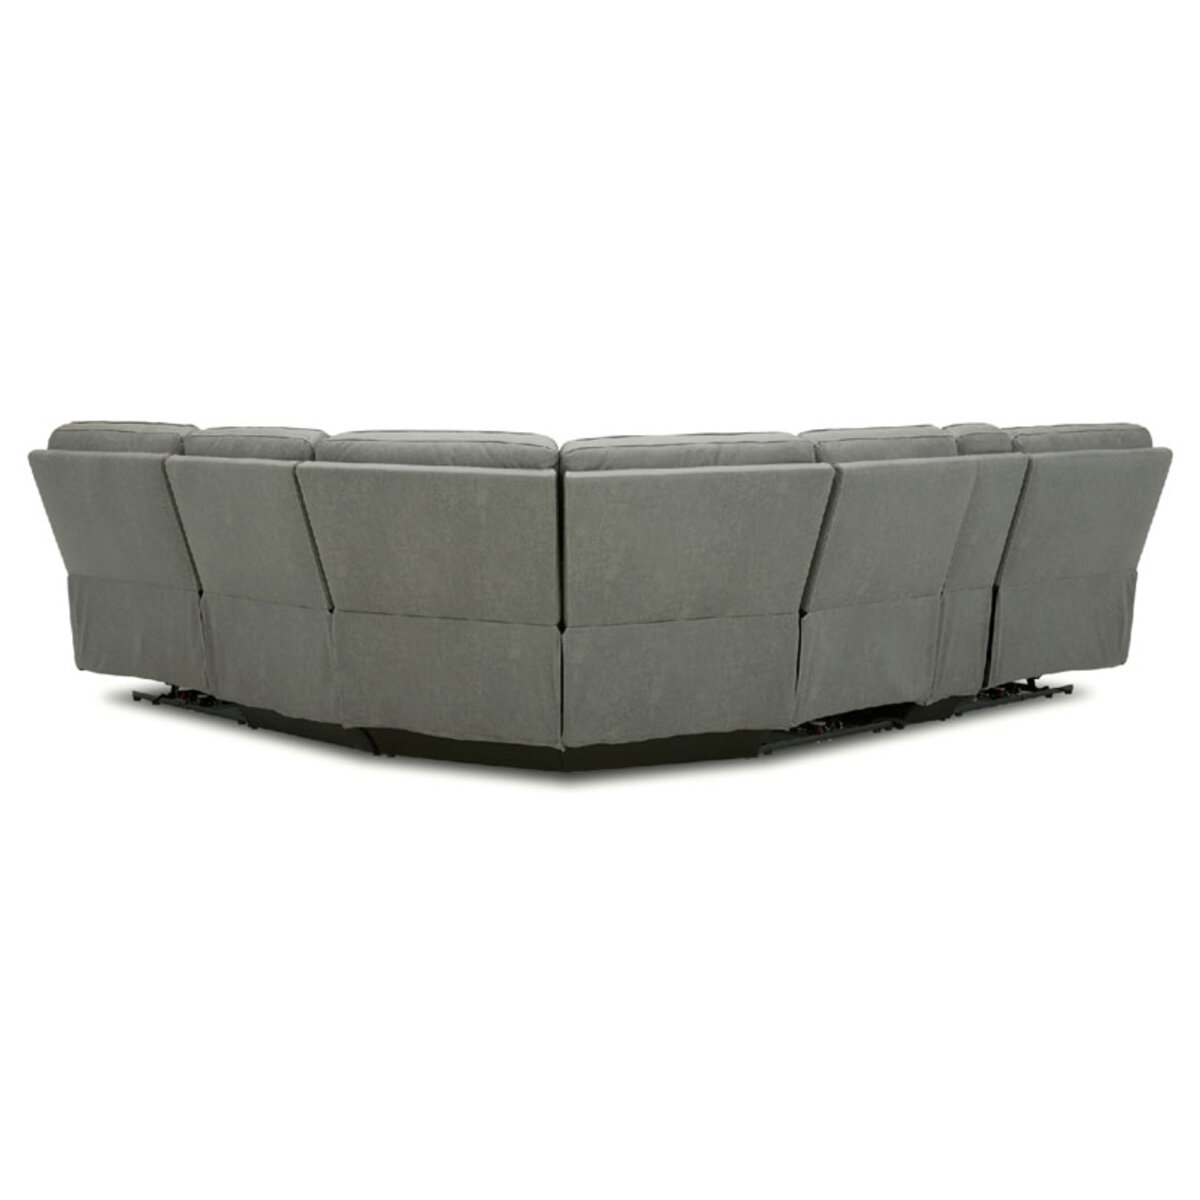 Image of the back of the sofa